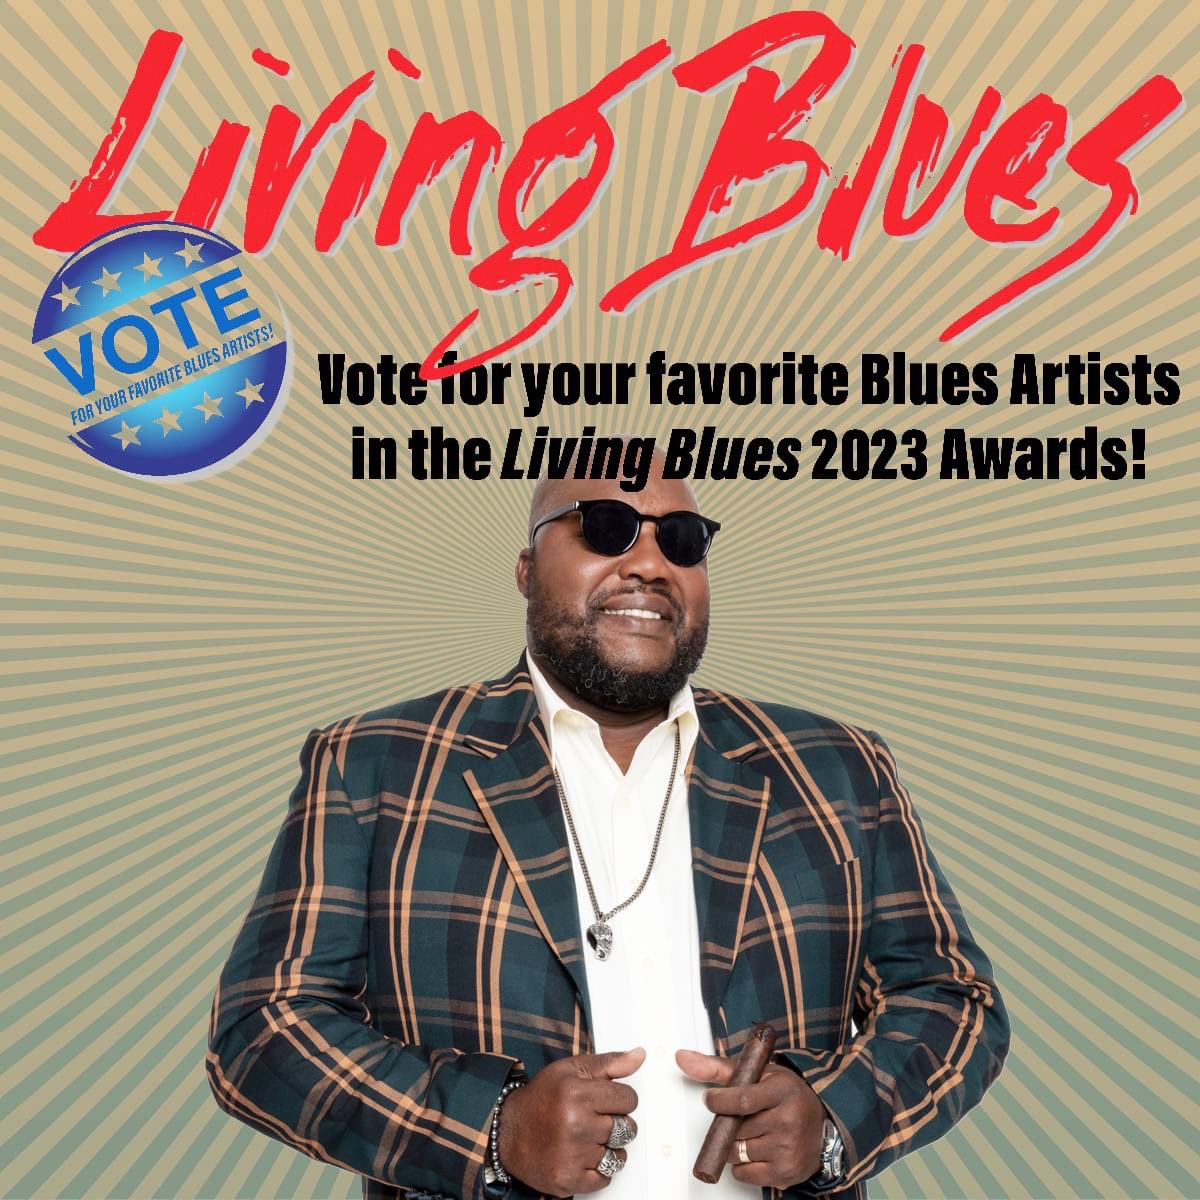 Congrats @SugarayRayford nominated for 3 @LivingBlues awards! Vote at www.livingblues * Most outstanding Blues Singer * Blues Artist of the Year * Best Blues Album (In Too Deep) Produced by @ericcorne Congratulations and Good luck to all the worthy nominees!